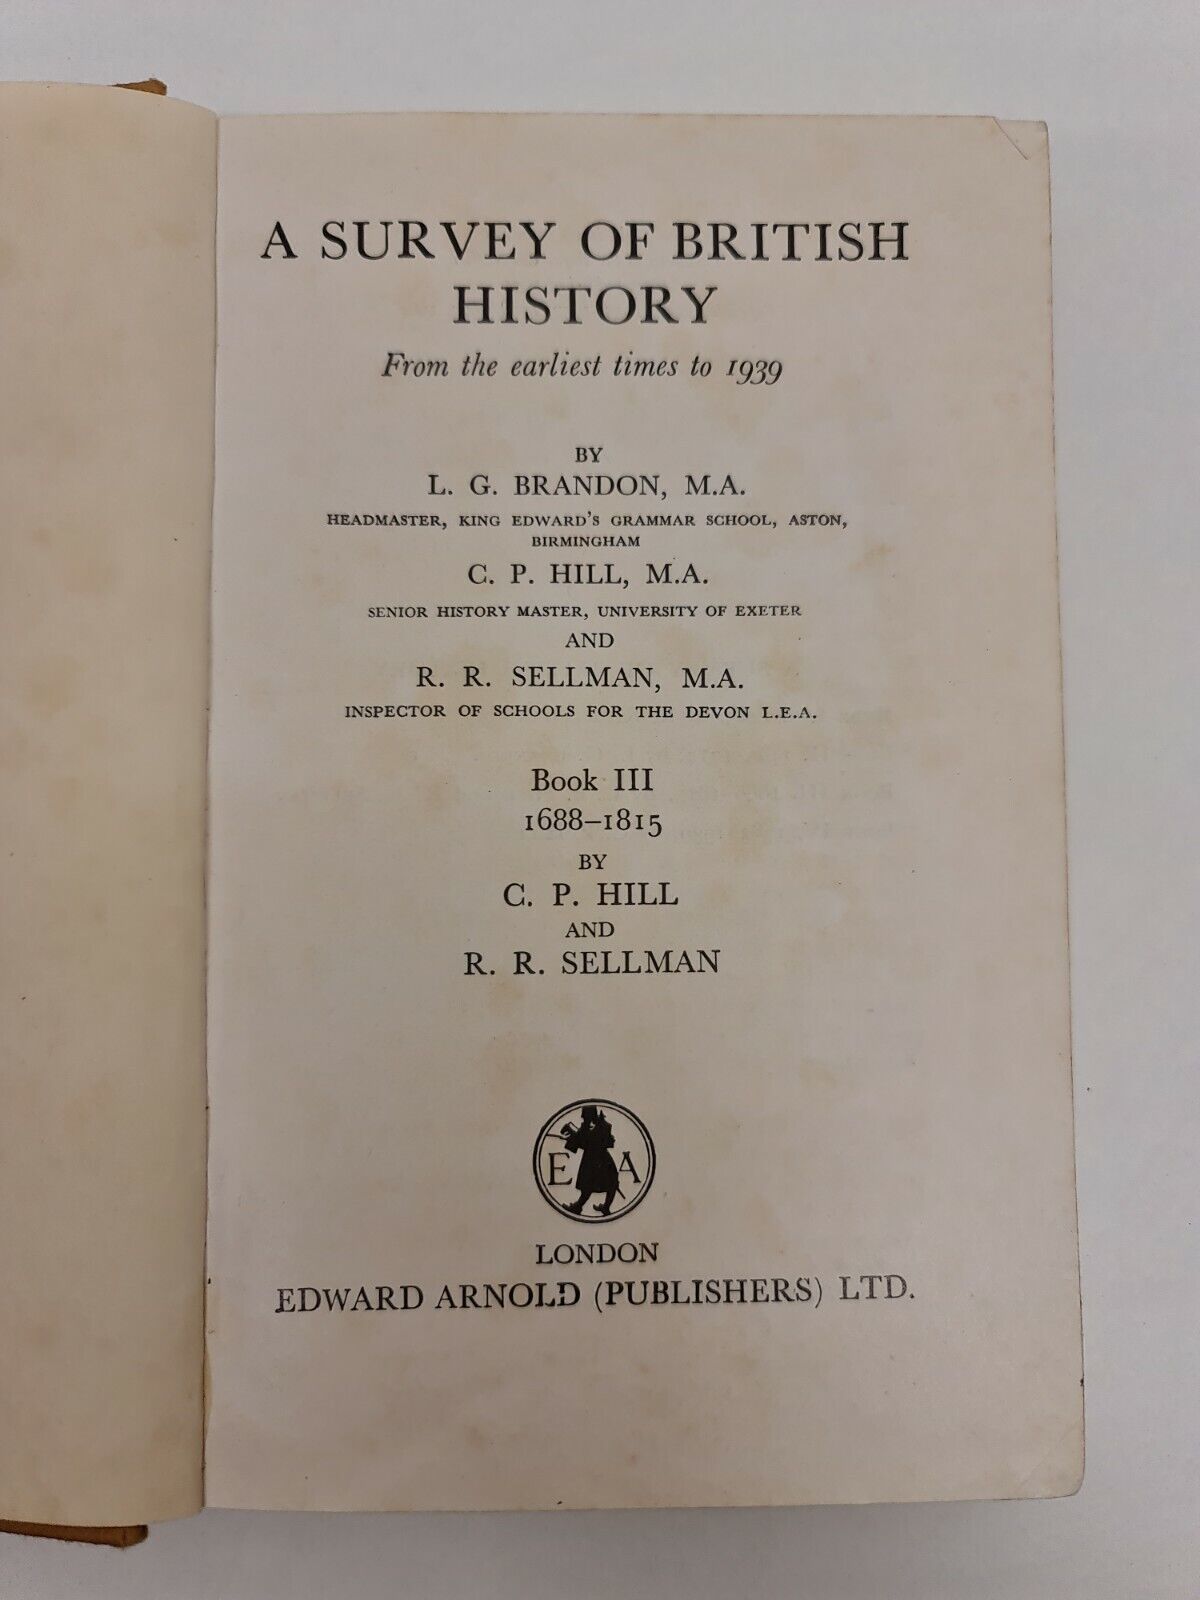 A Survey of British History, Book 3: 1688-1815 by Brandon (1962)